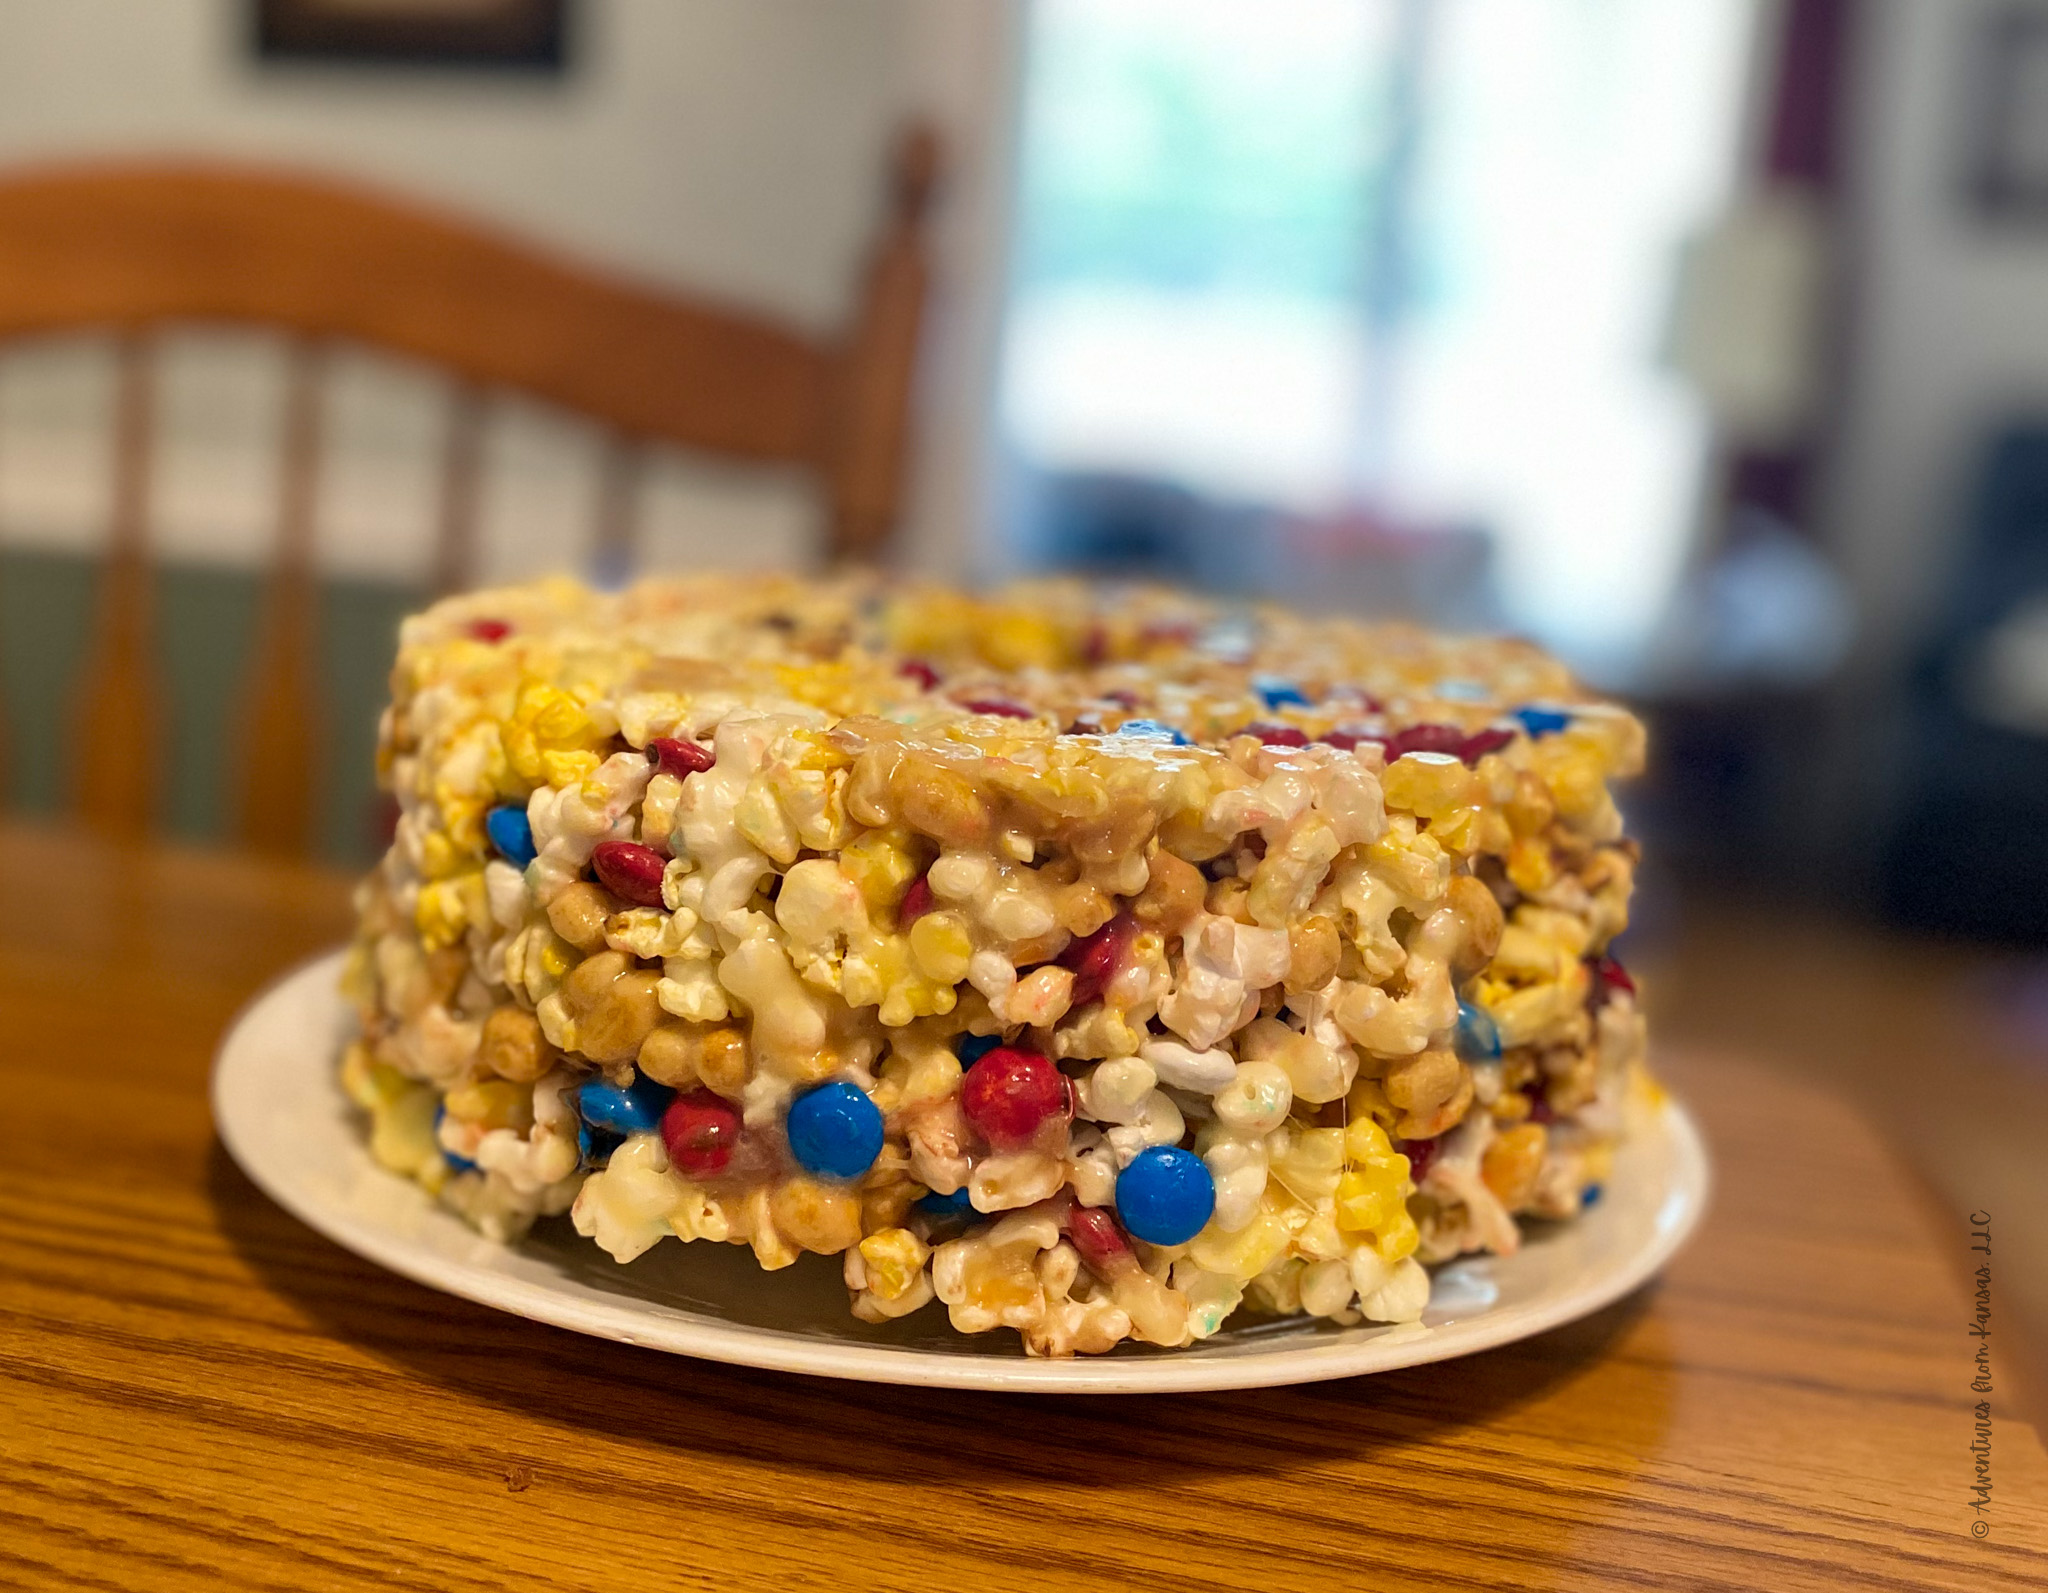 popcorn cake sitting on table with chair in background